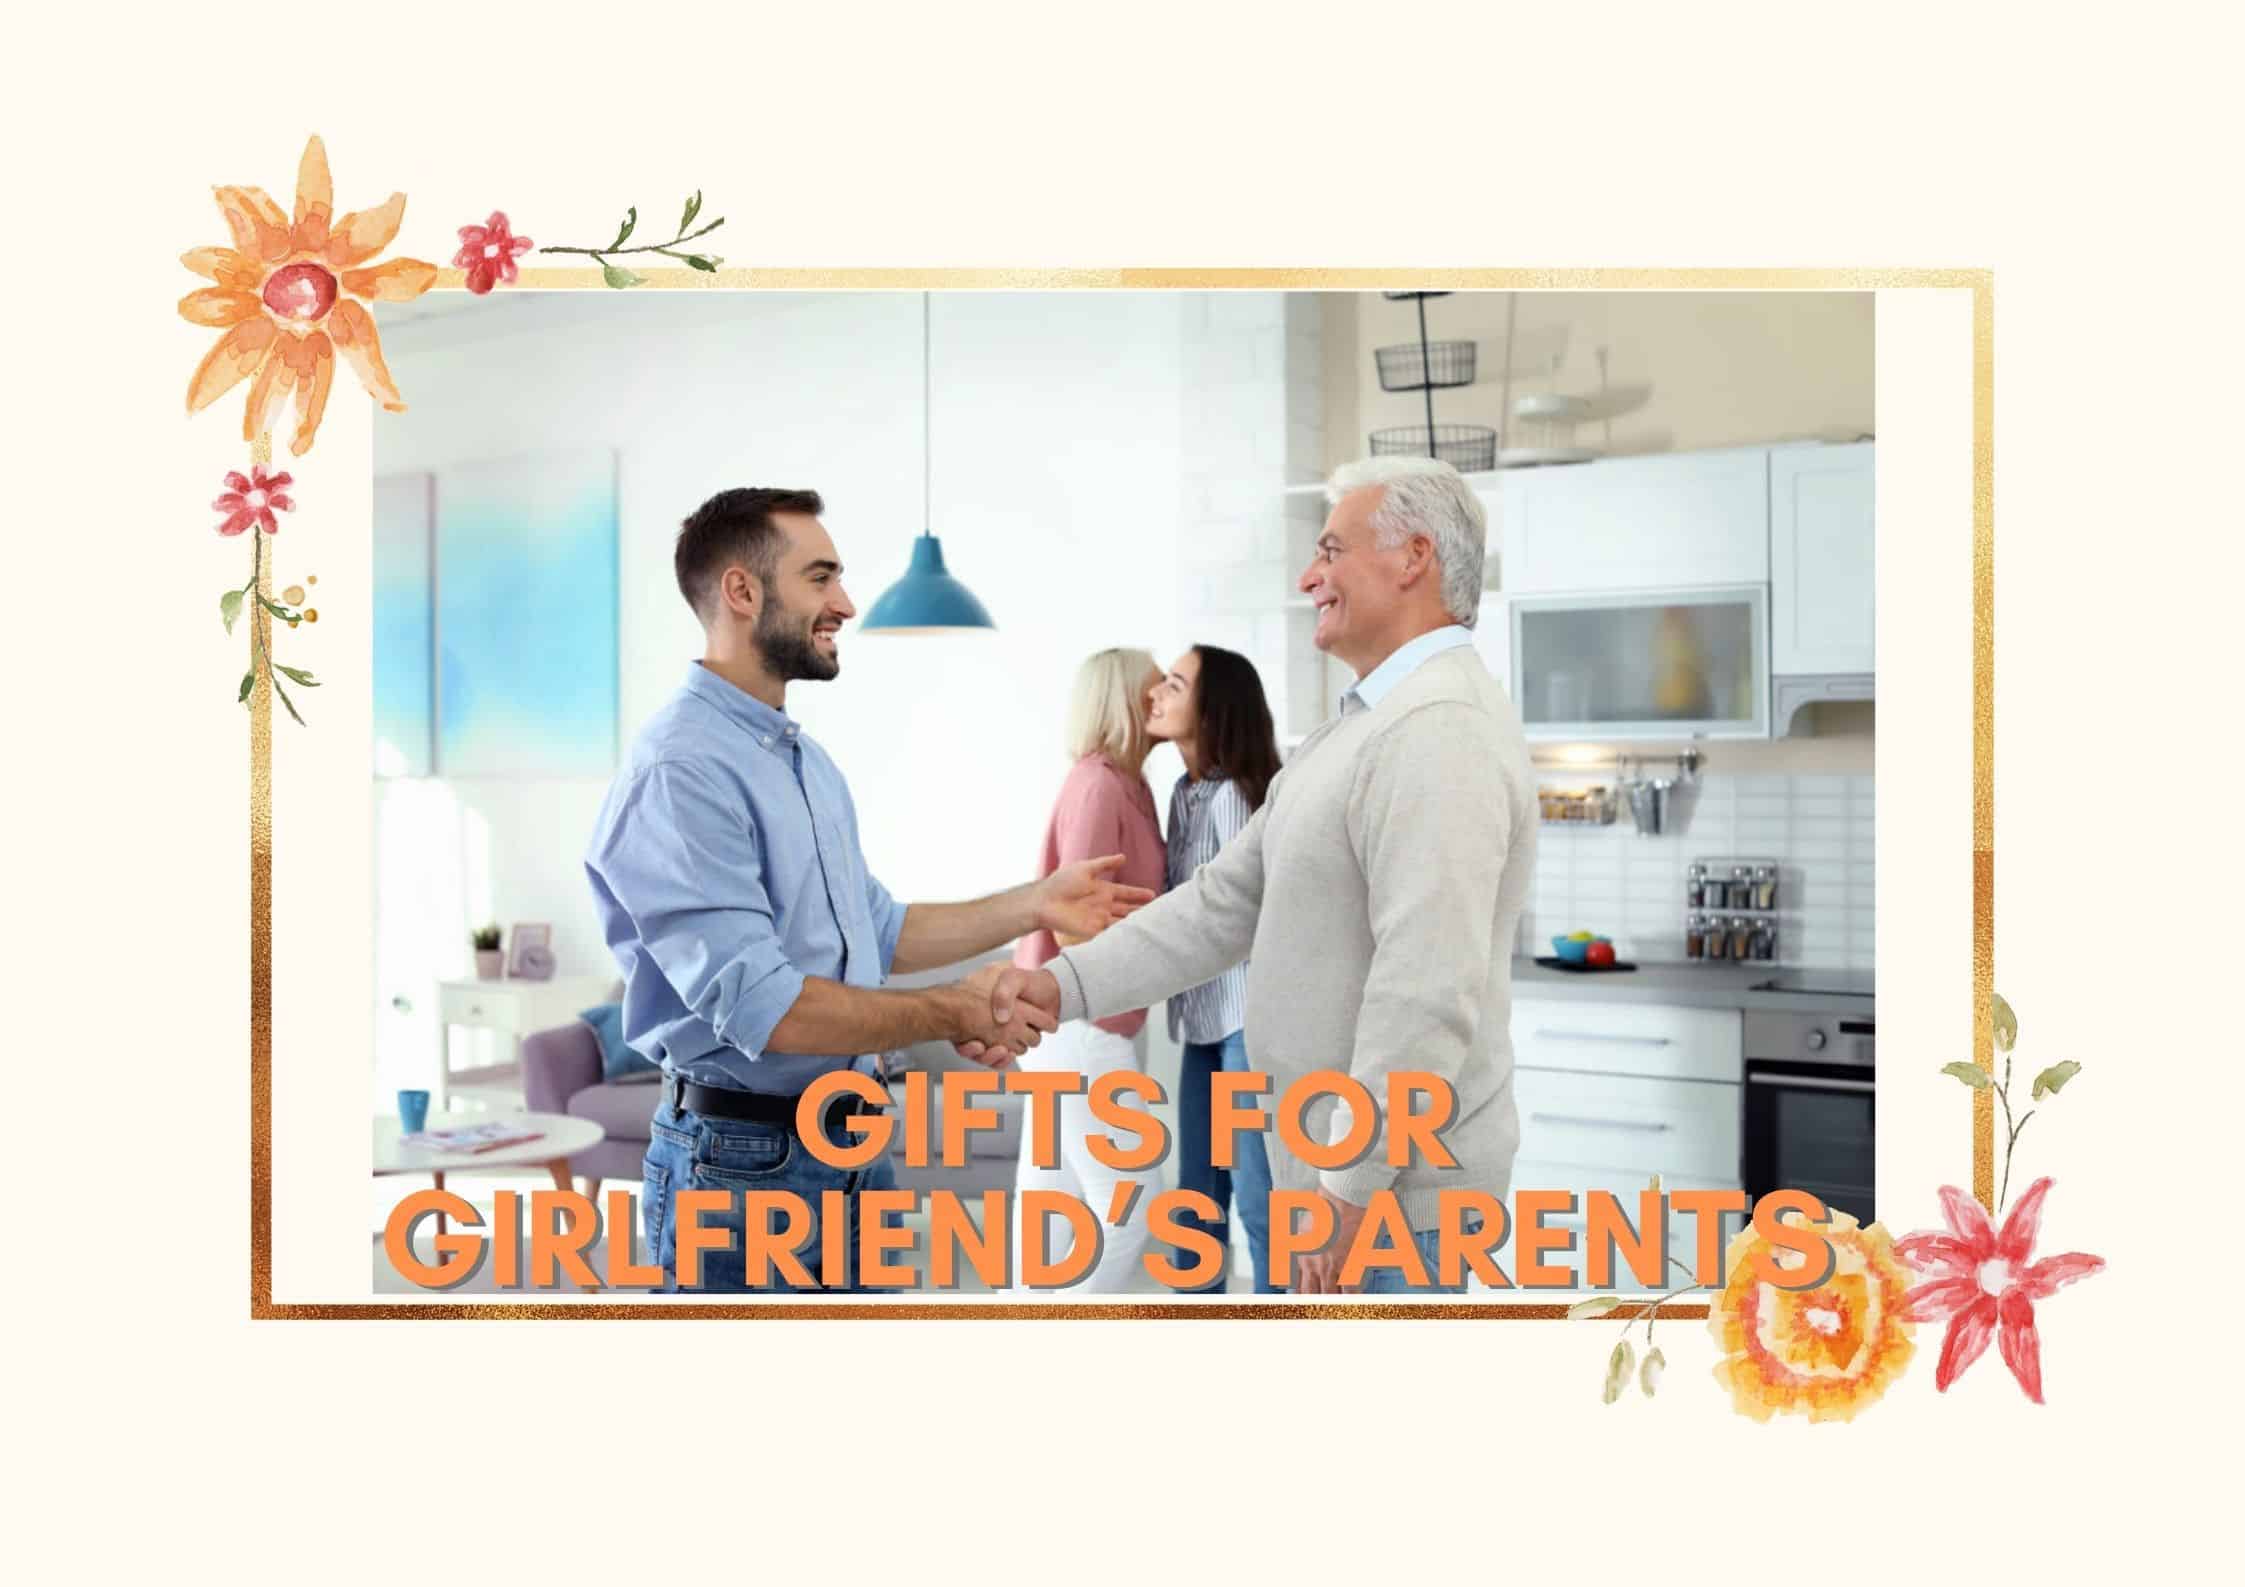 25+ Gifts For Girlfriend’s Parents That Will Make Future-in-law Feel Satisfied (2022)